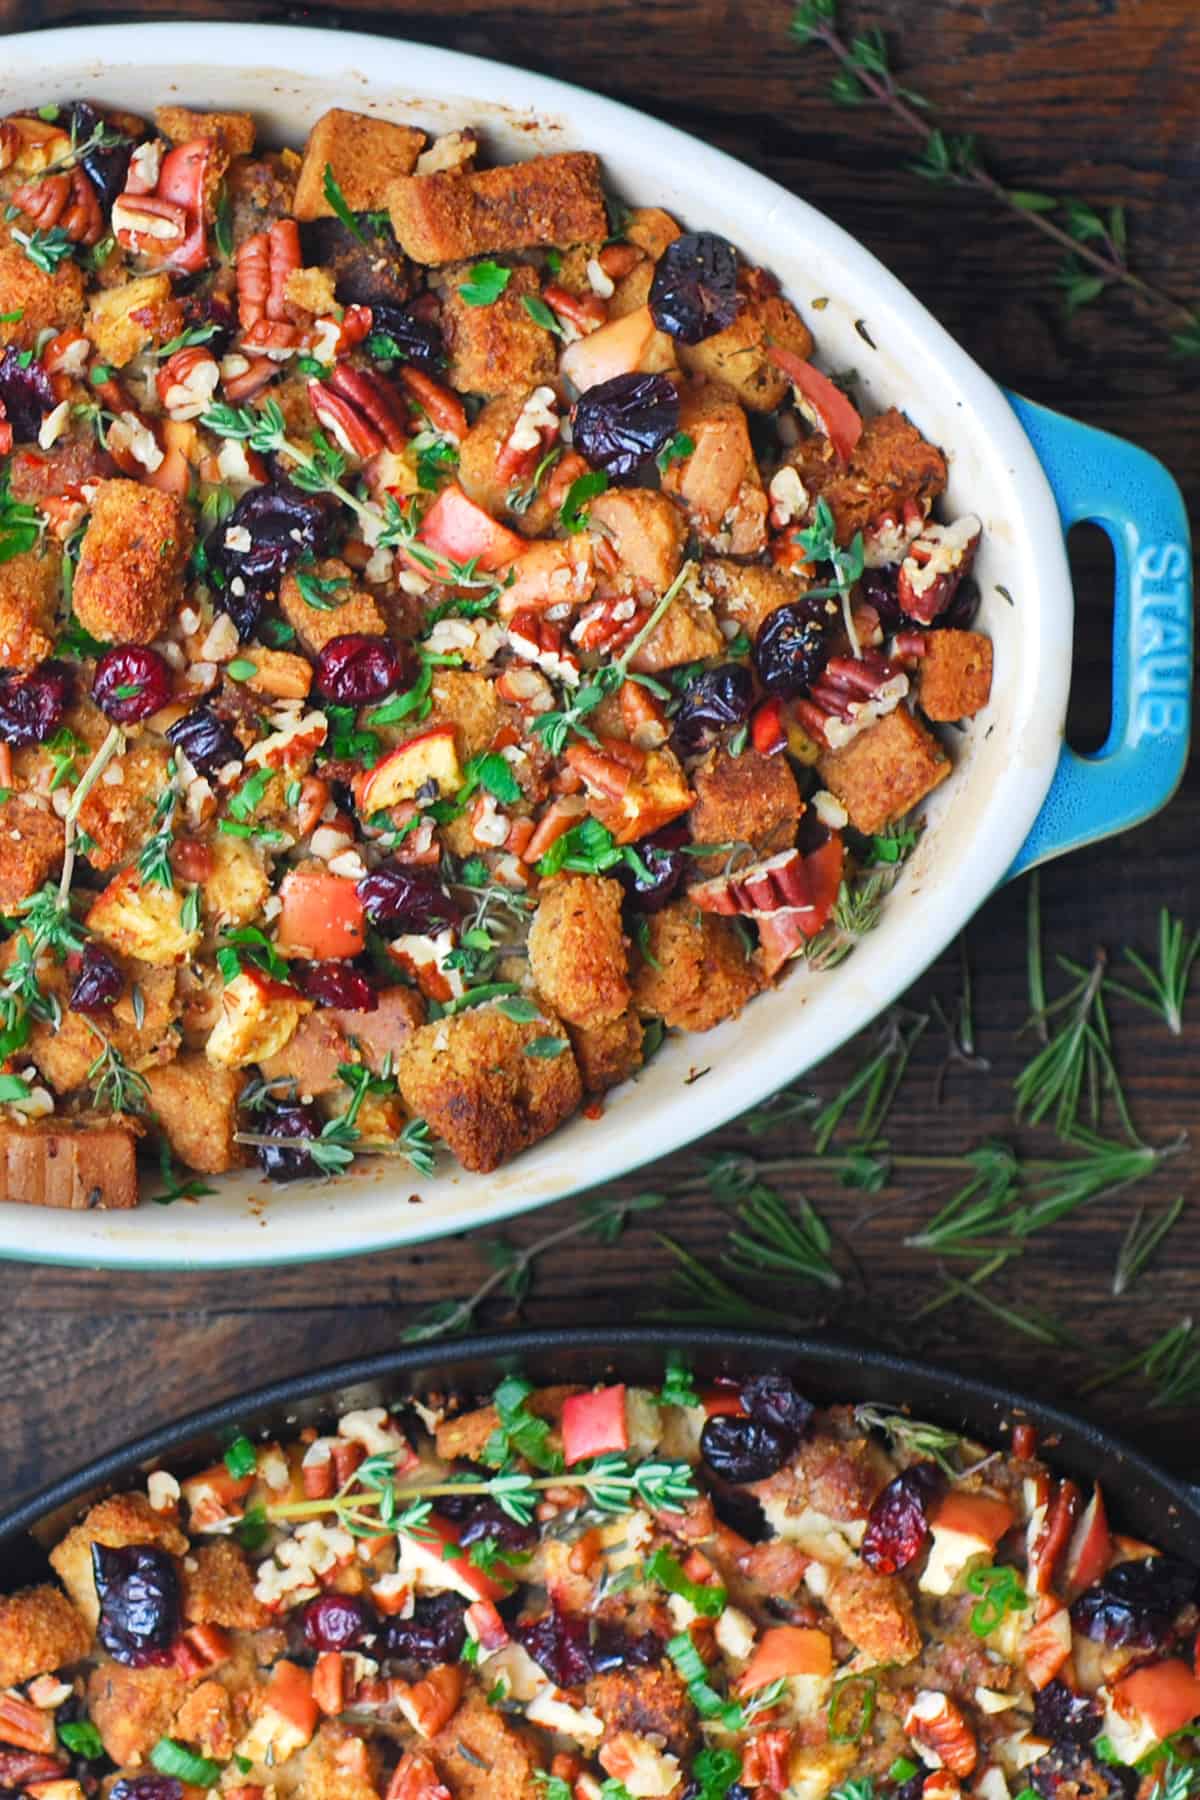 Christmas sausage stuffing with apples, cranberries, and pecans in two oval baking dishes